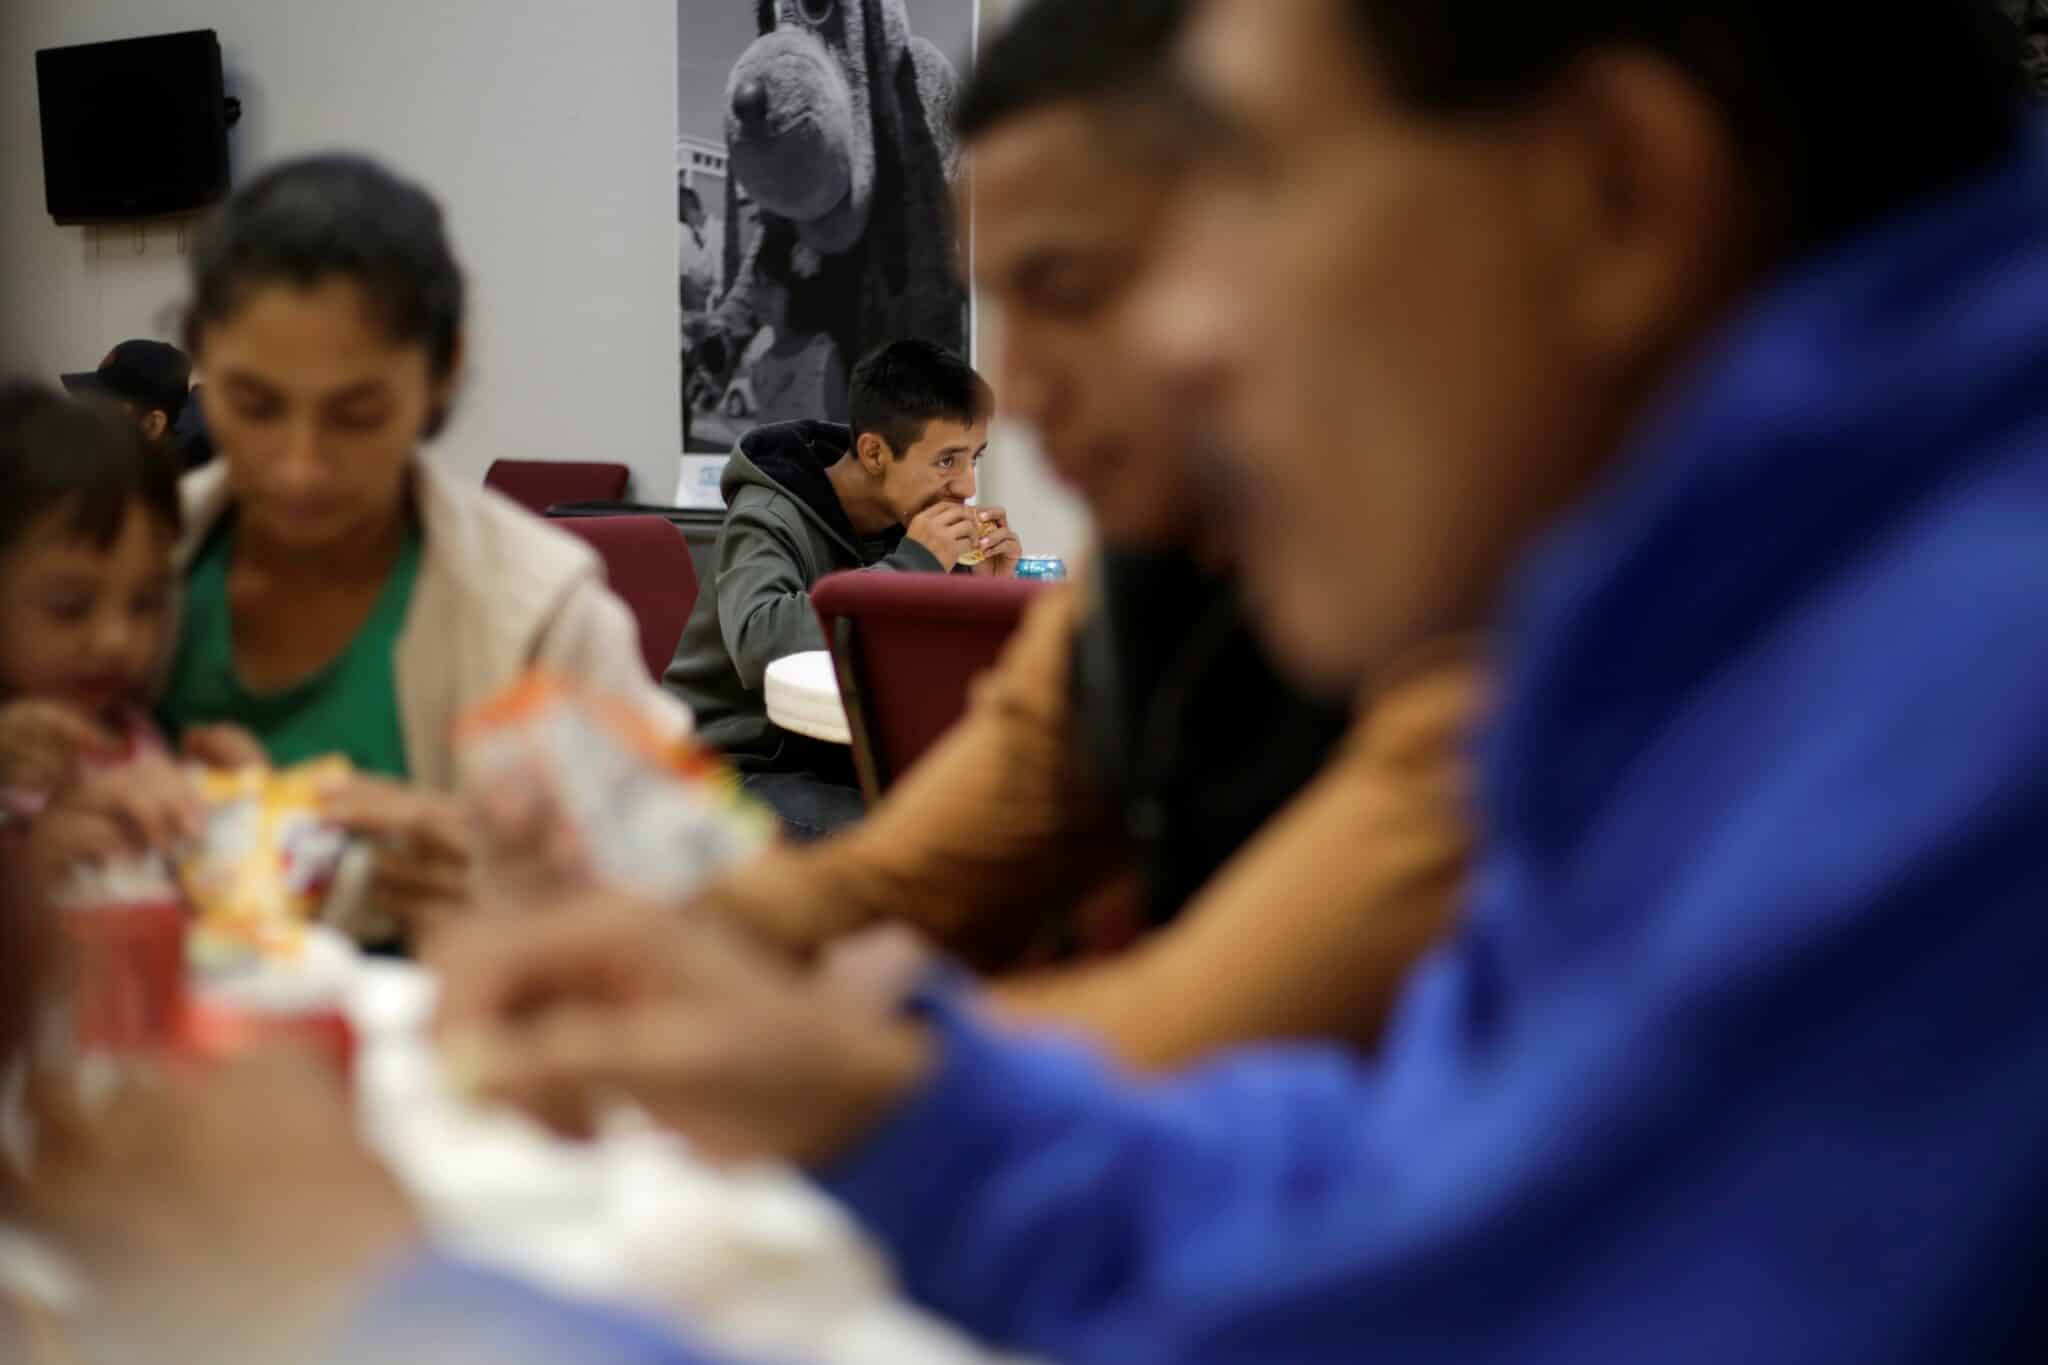 Migrants from Central America eat at Vino Nuevo church, which gives temporary shelter to migrants released by U.S. Customs and Border Protection (CBP) due overcrowded facilities, in El Paso, Texas, U.S., April 18, 2019. (OSV News photo/Jose Luis Gonzalez, Reuters)